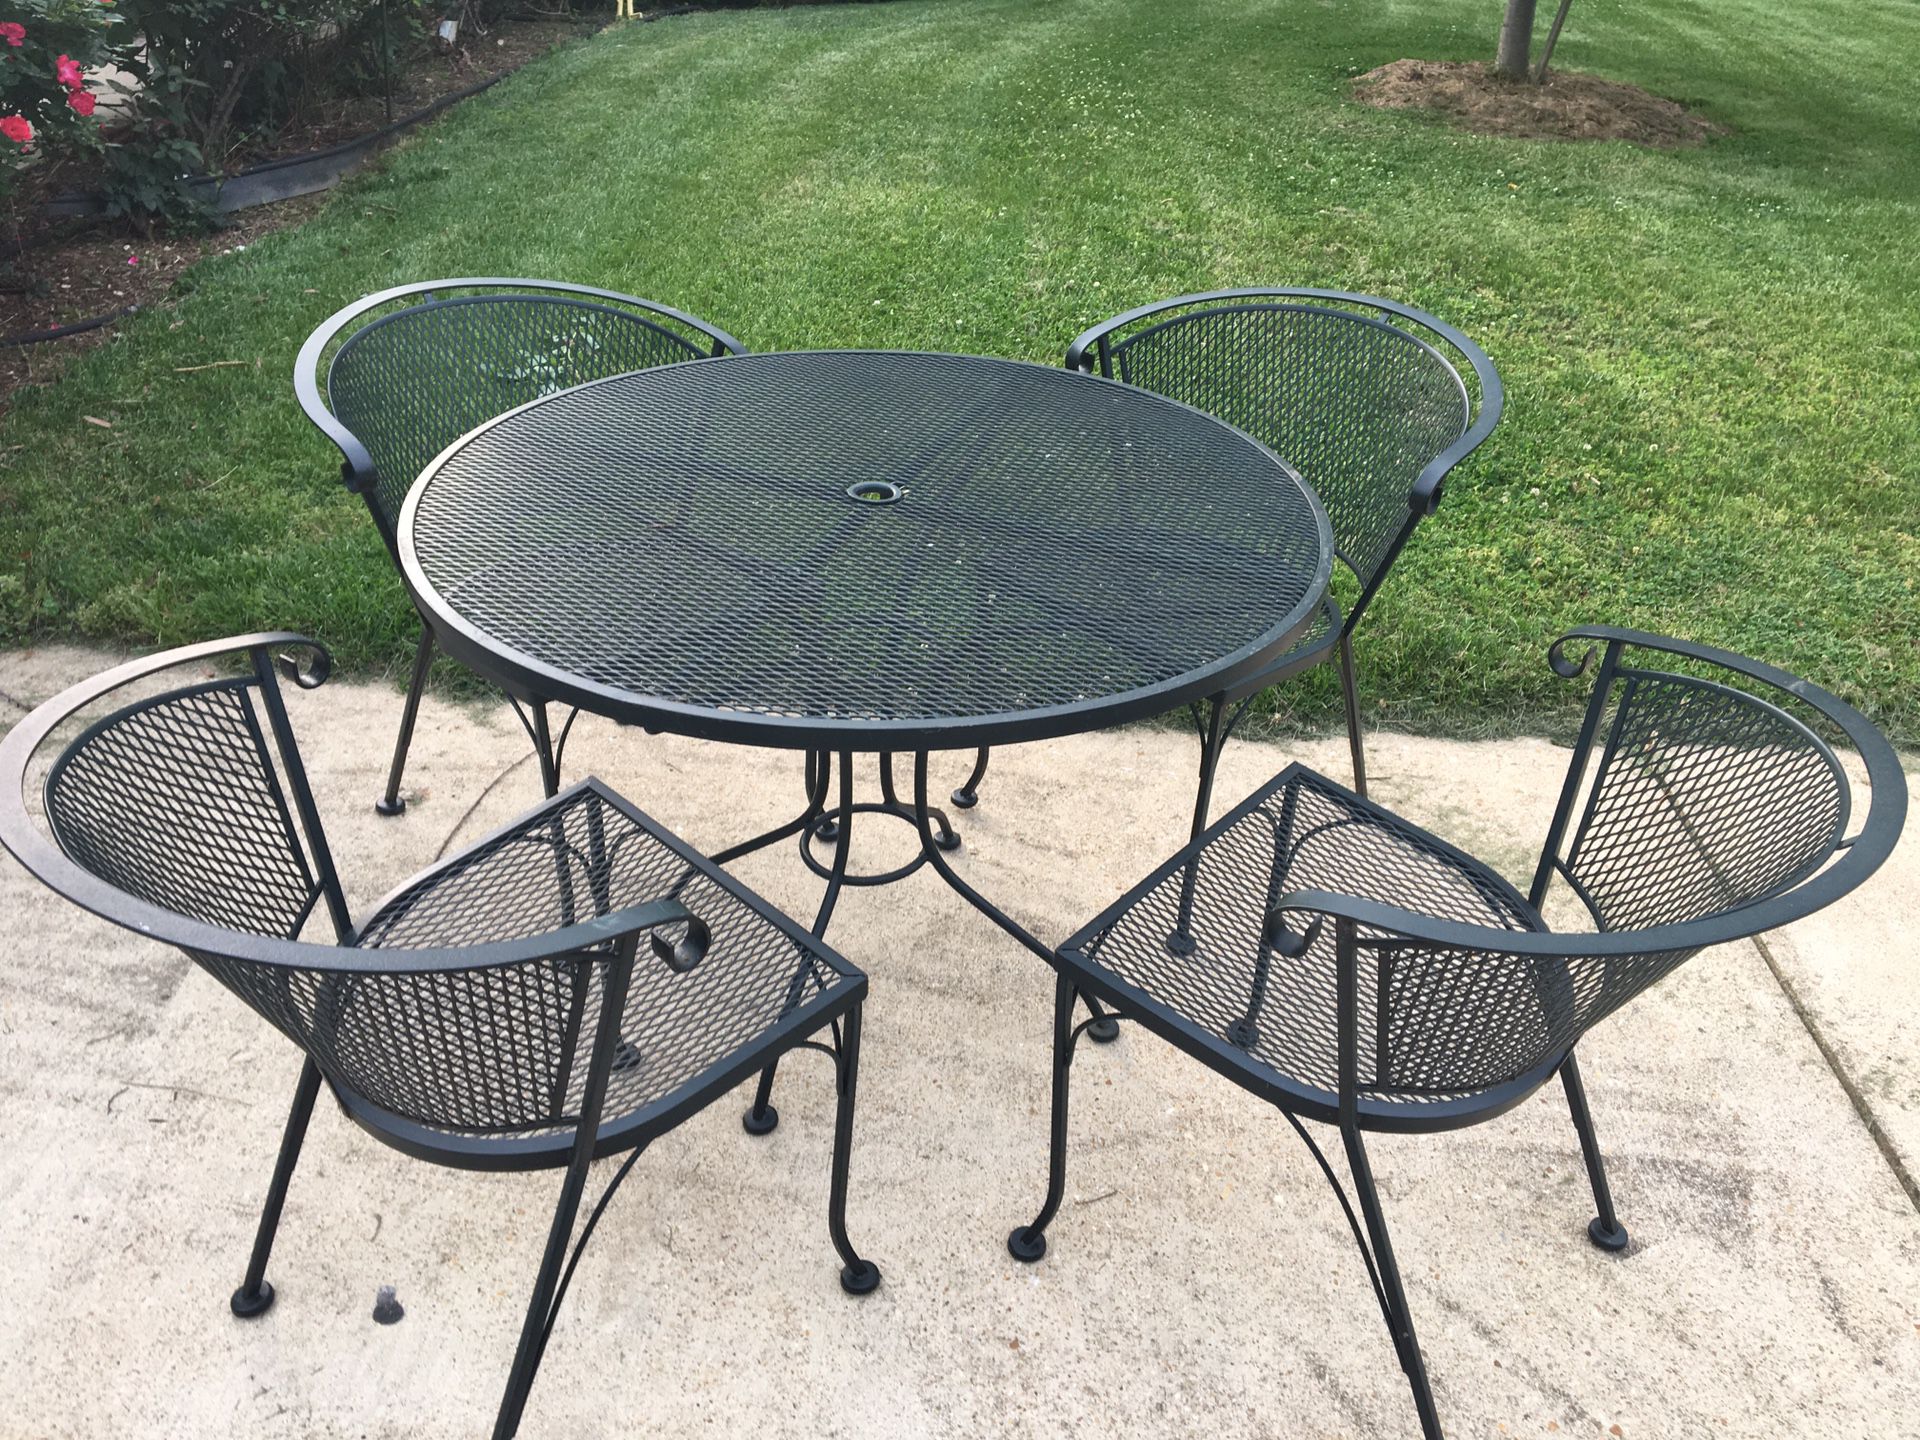 Patio set table and 4 chairs